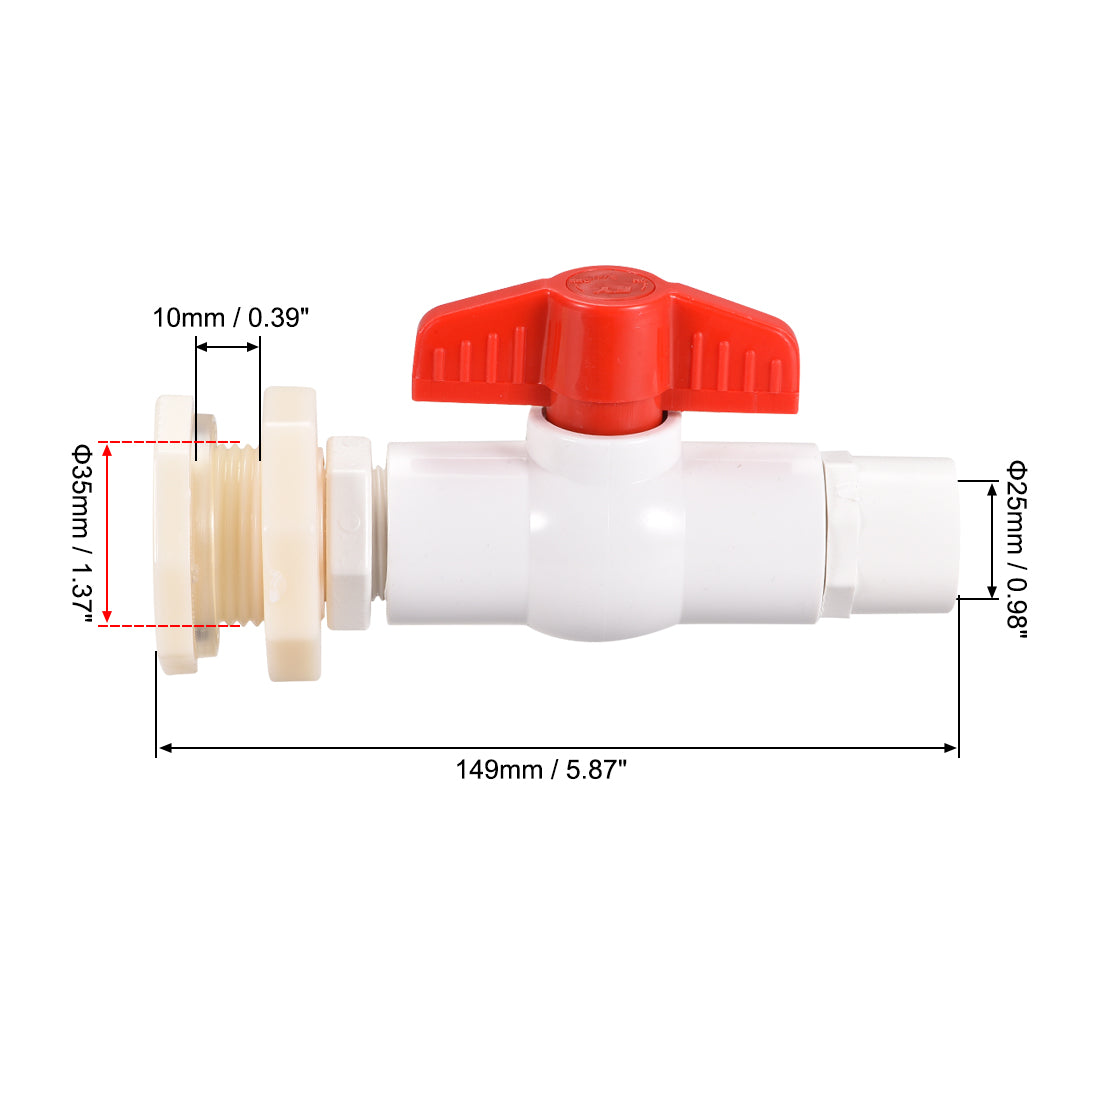 Uxcell Uxcell PVC Ball Valve Connector Spigot Kit G3/4, with Bulkhead, White Red 2Pcs